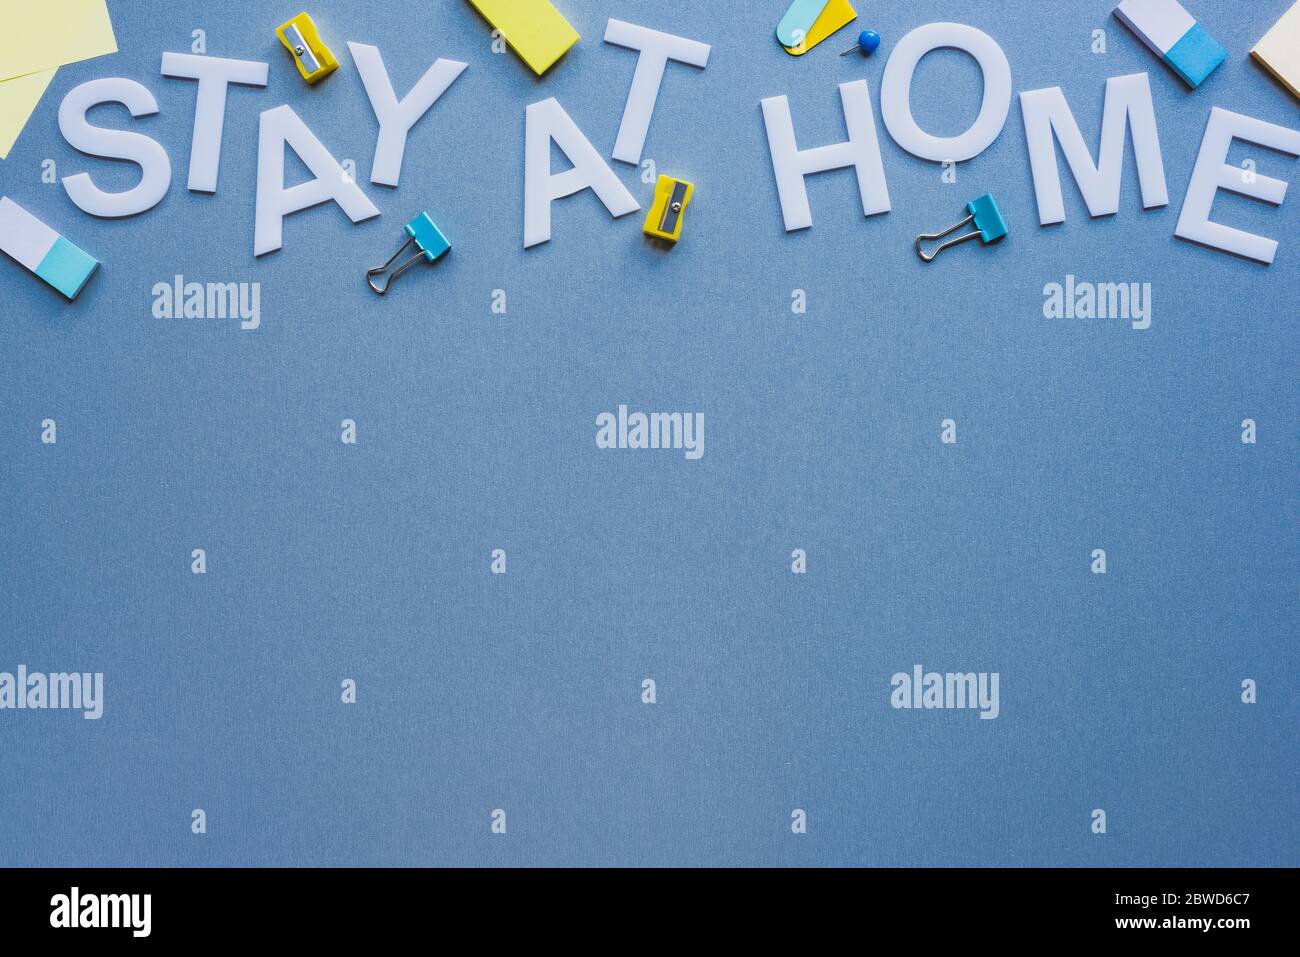 Top view of stay at home lettering near pencil sharpeners, erasers and binder clips on blue surface Stock Photo